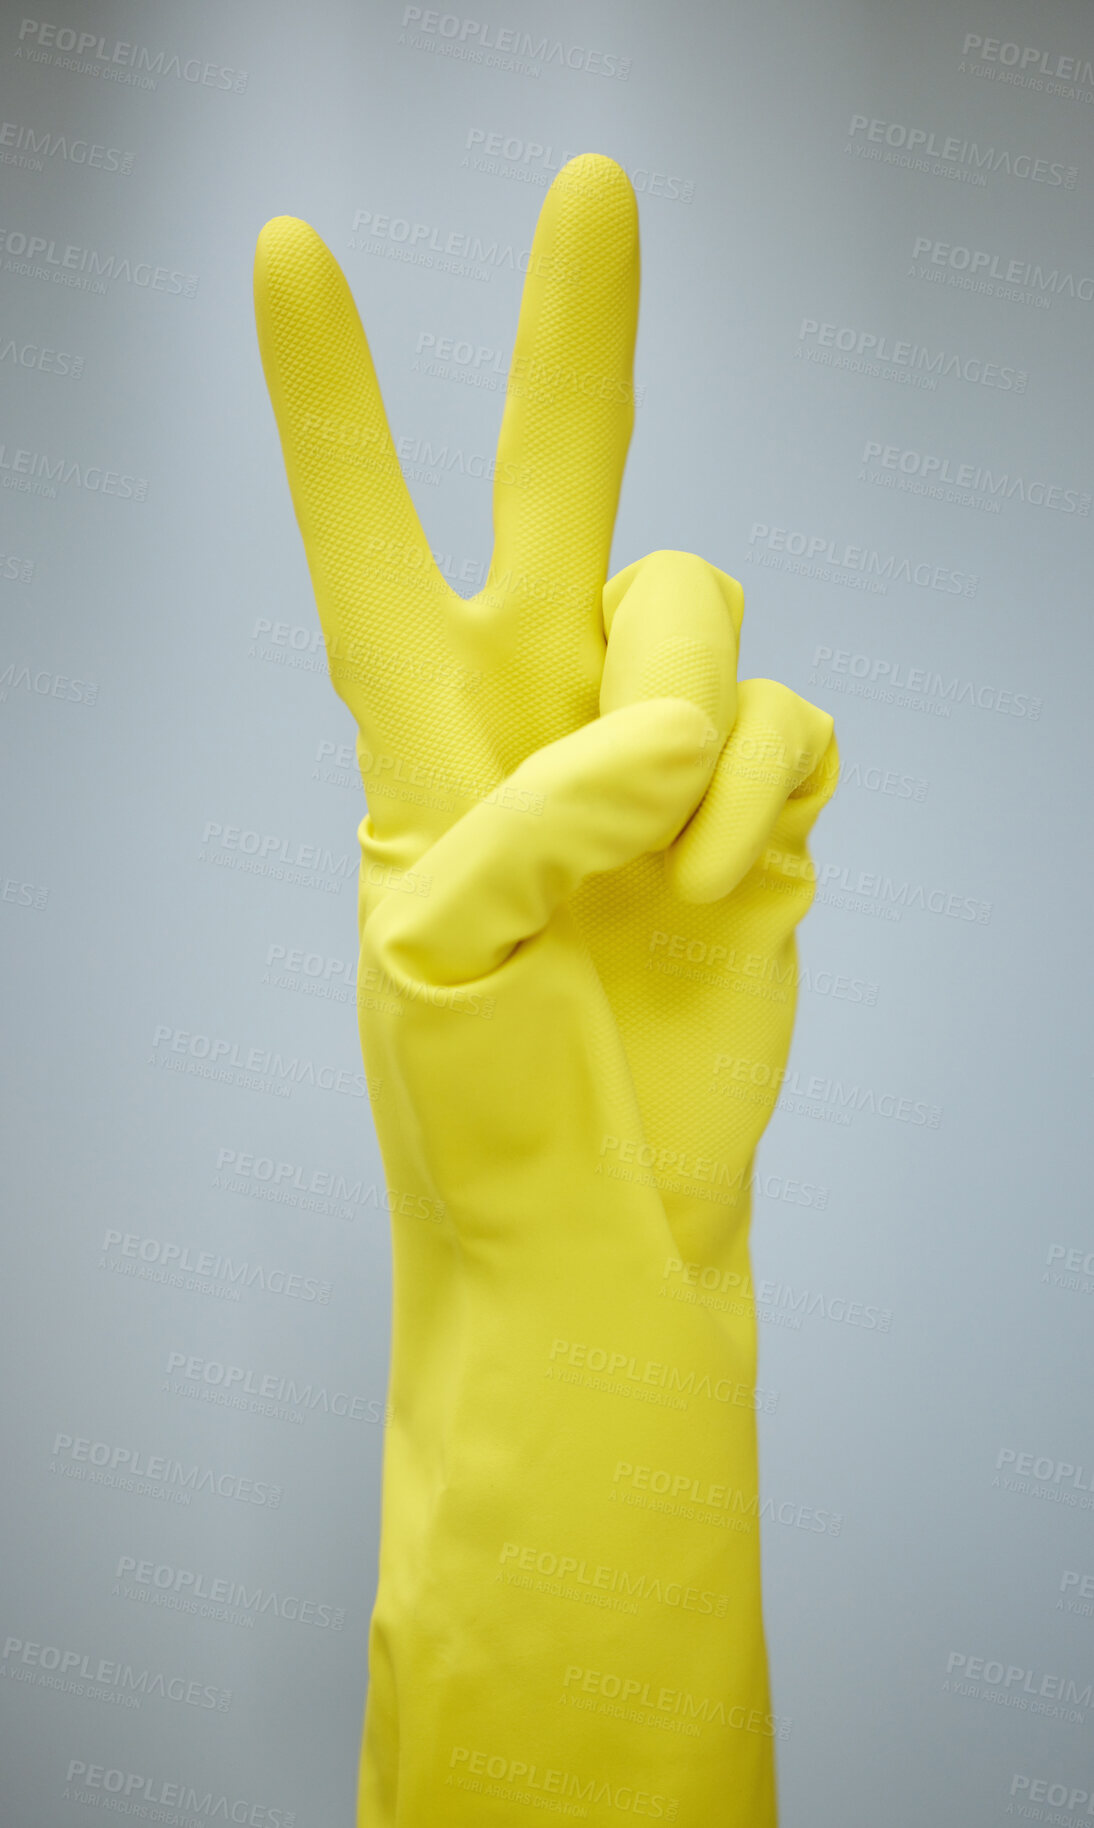 Buy stock photo Shot of a hand showing the peace sign while wearing yellow rubber gloves